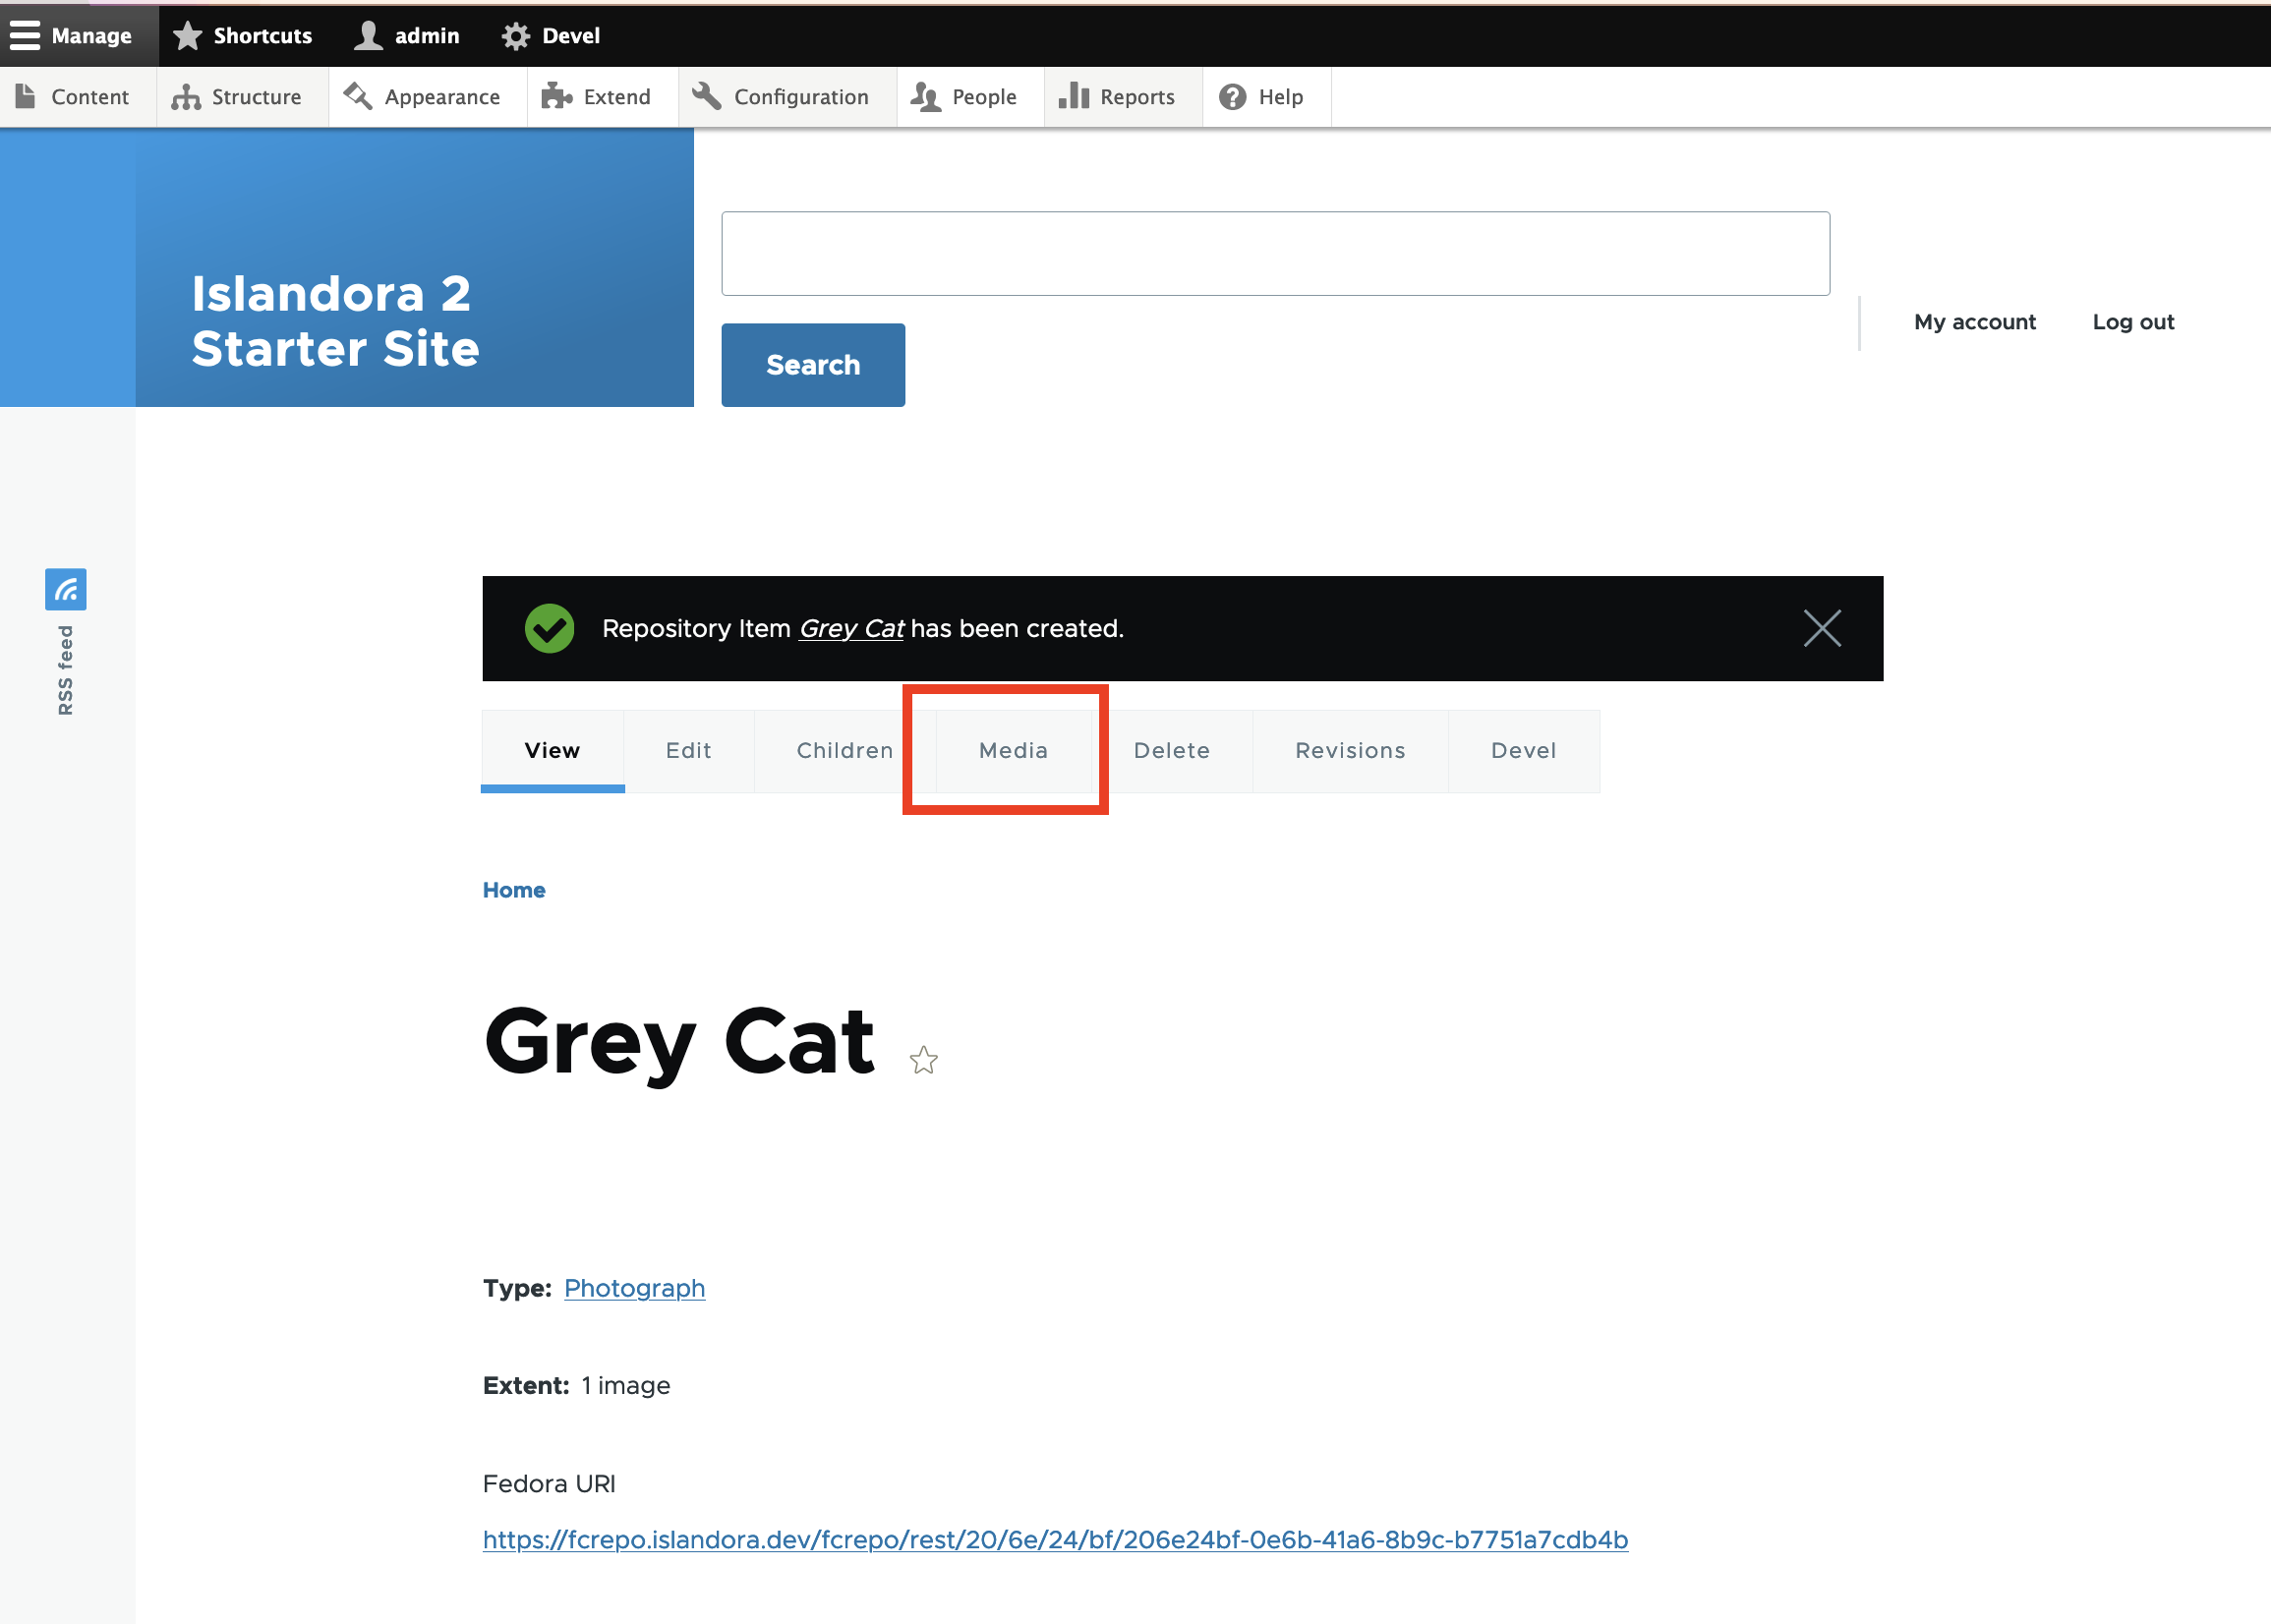 Node page showing Media tab